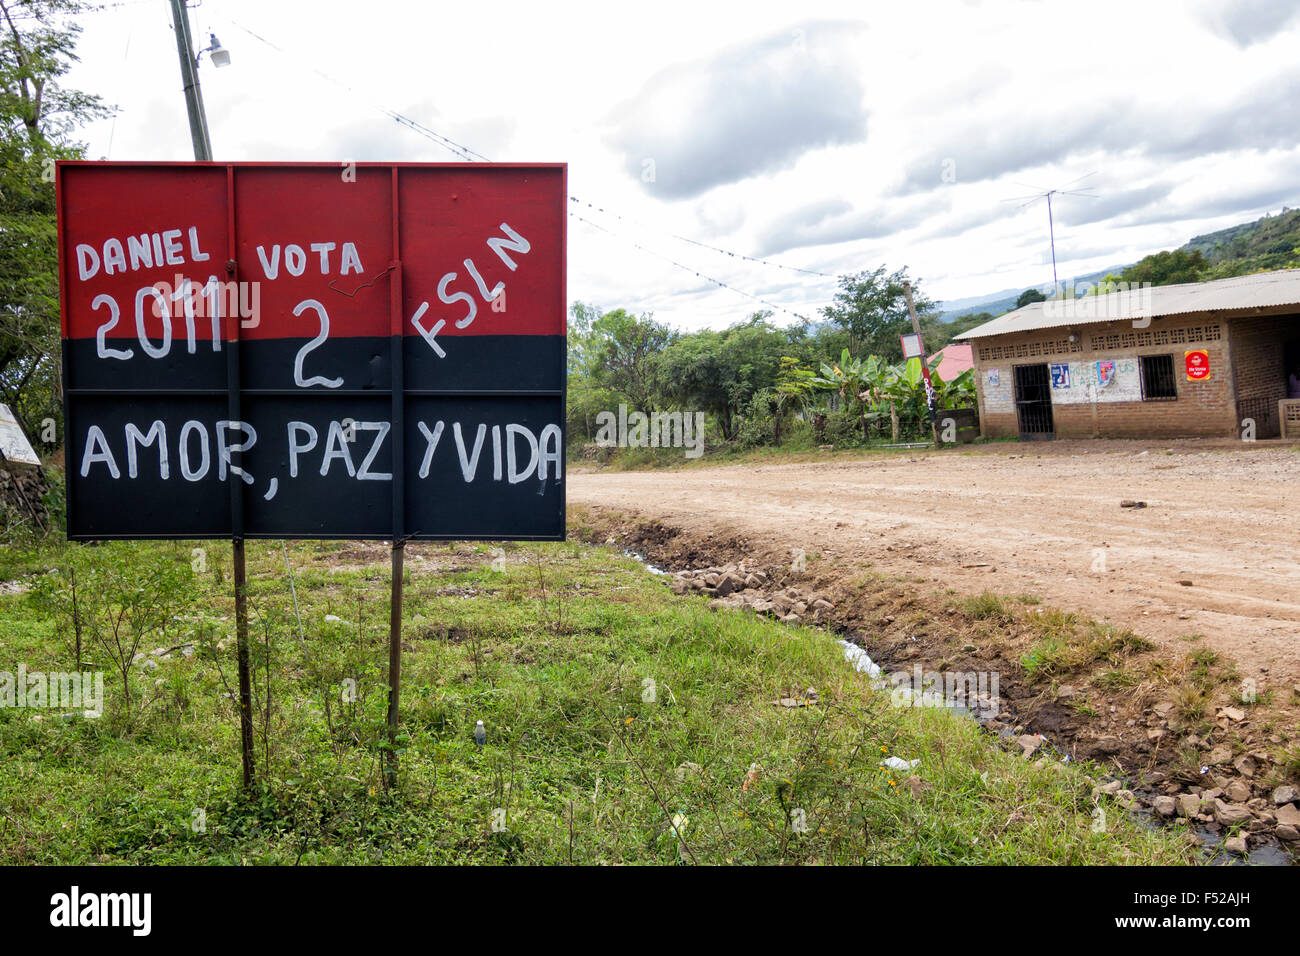 Sandinista electoral propaganda painted on a street sign in Nicaragua Stock Photo